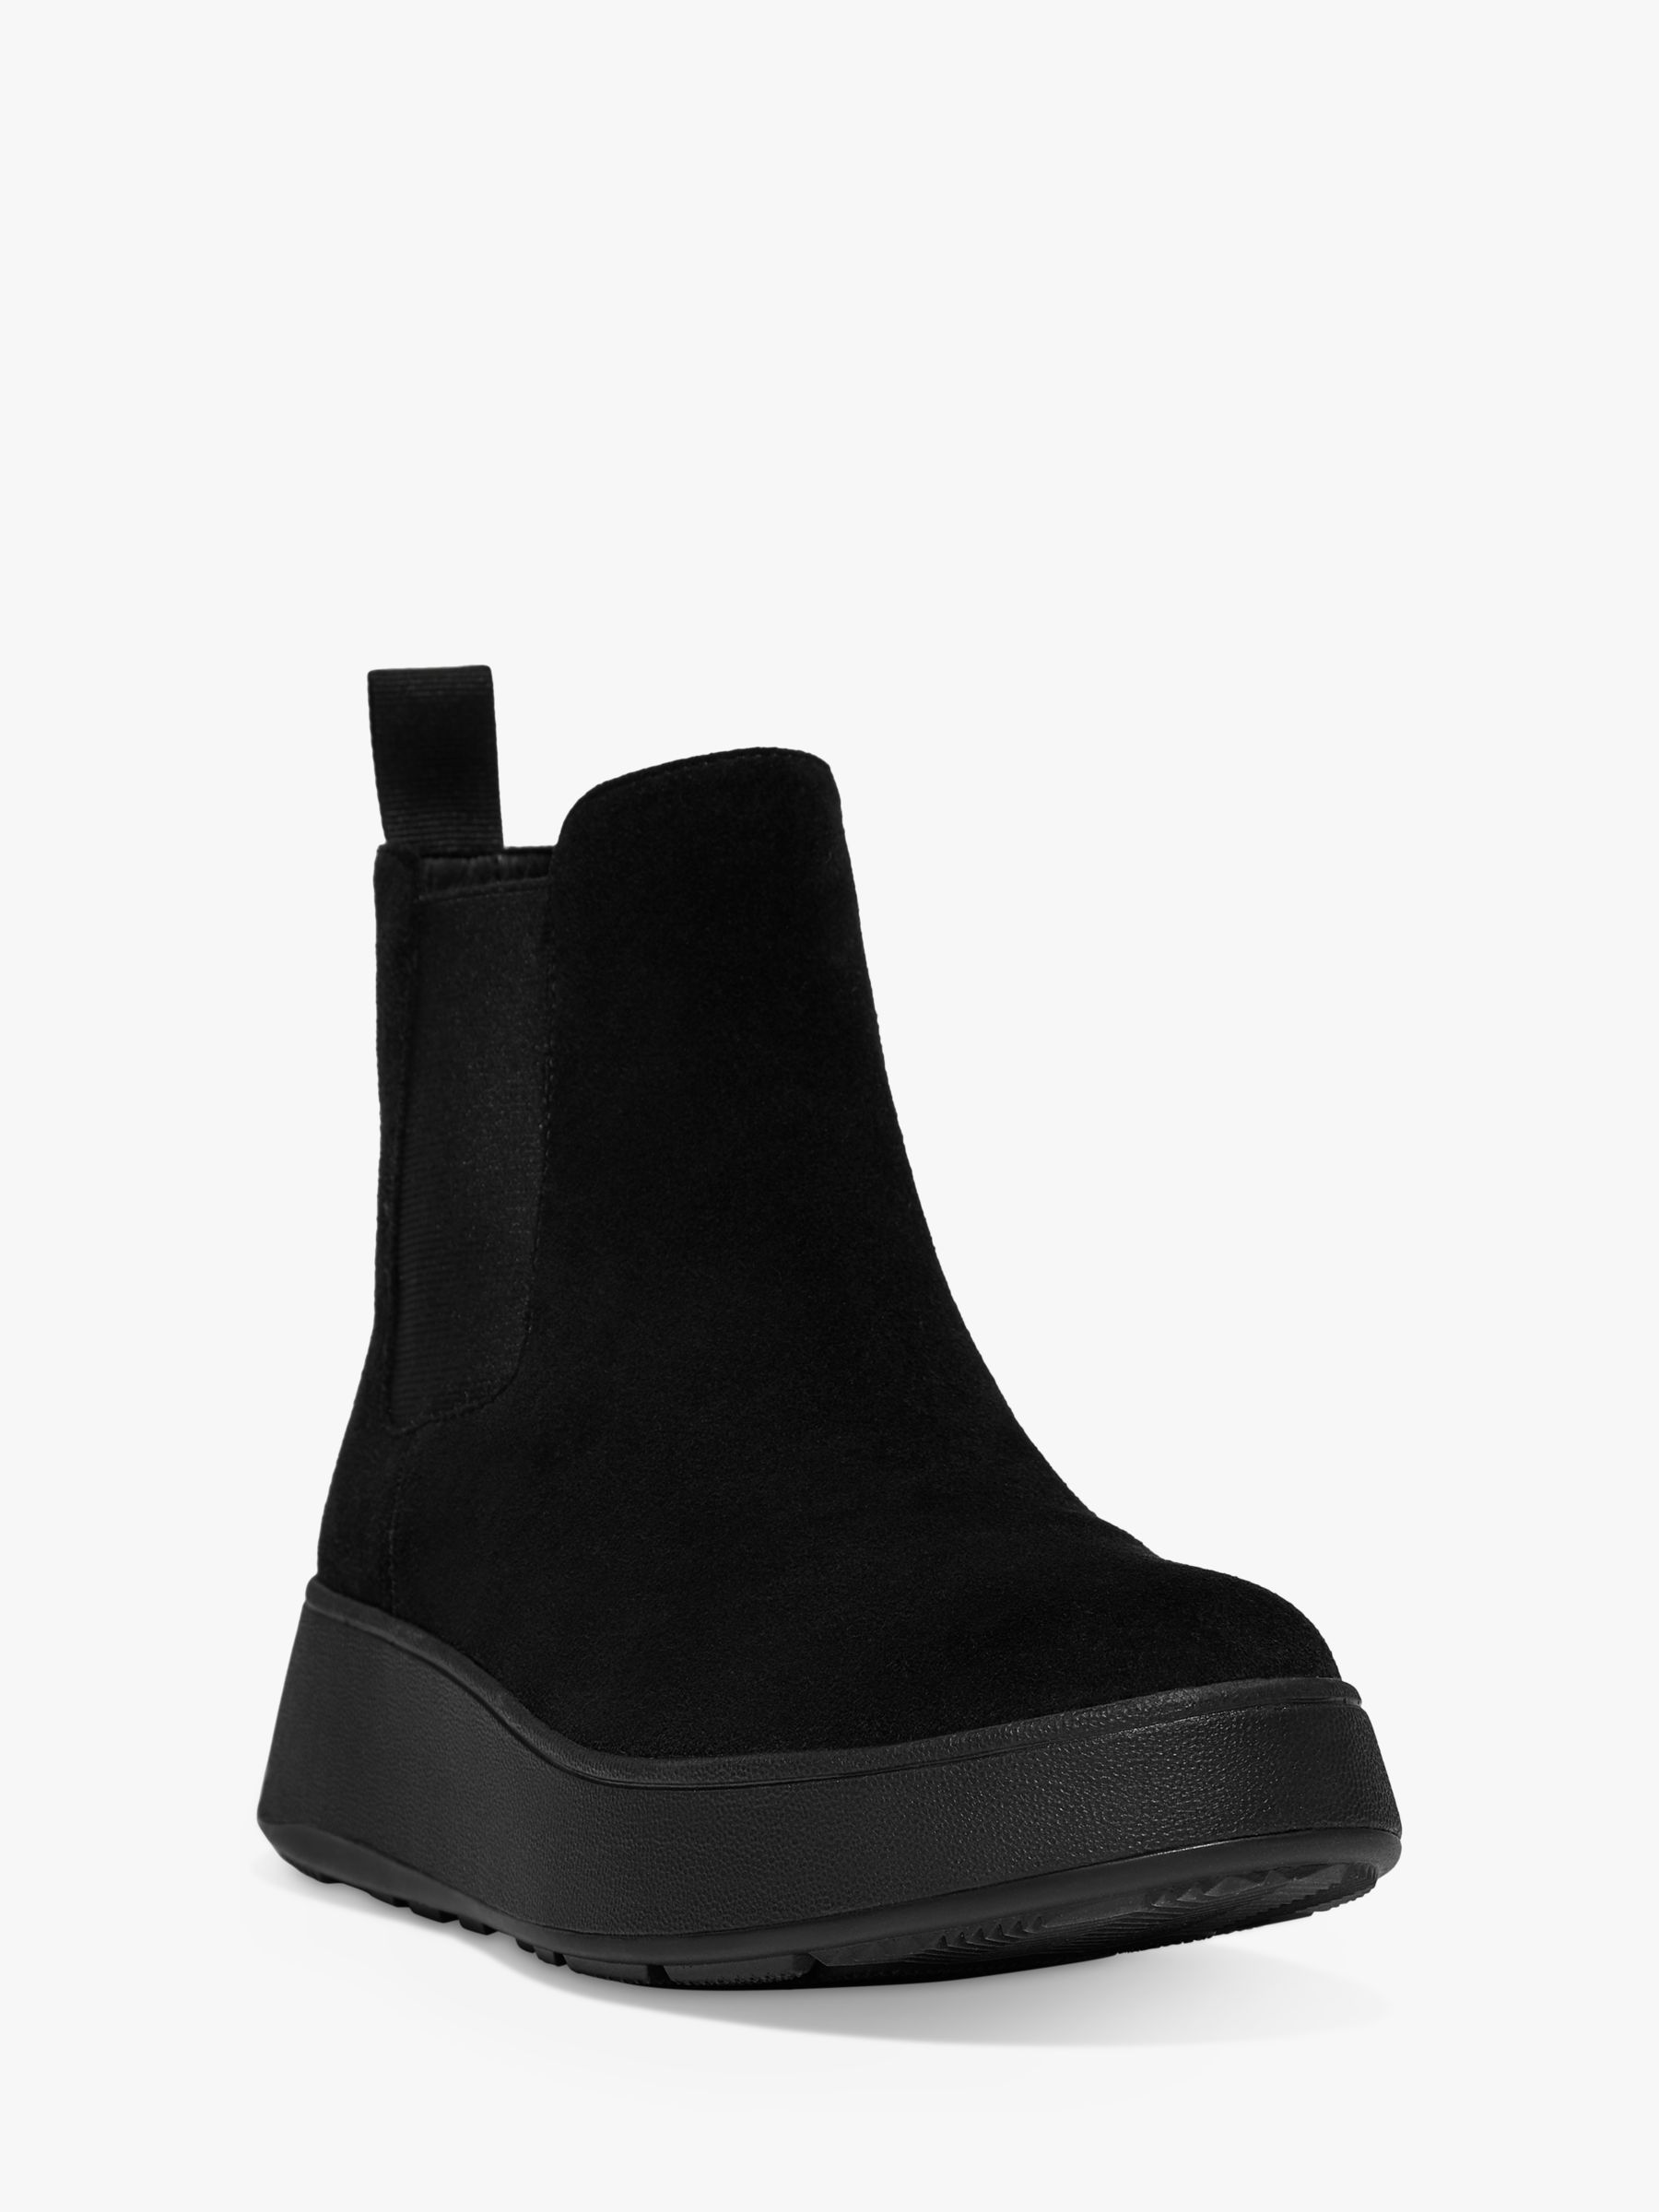 FitFlop Suede Flatform Chelsea Boots, All Black, 3